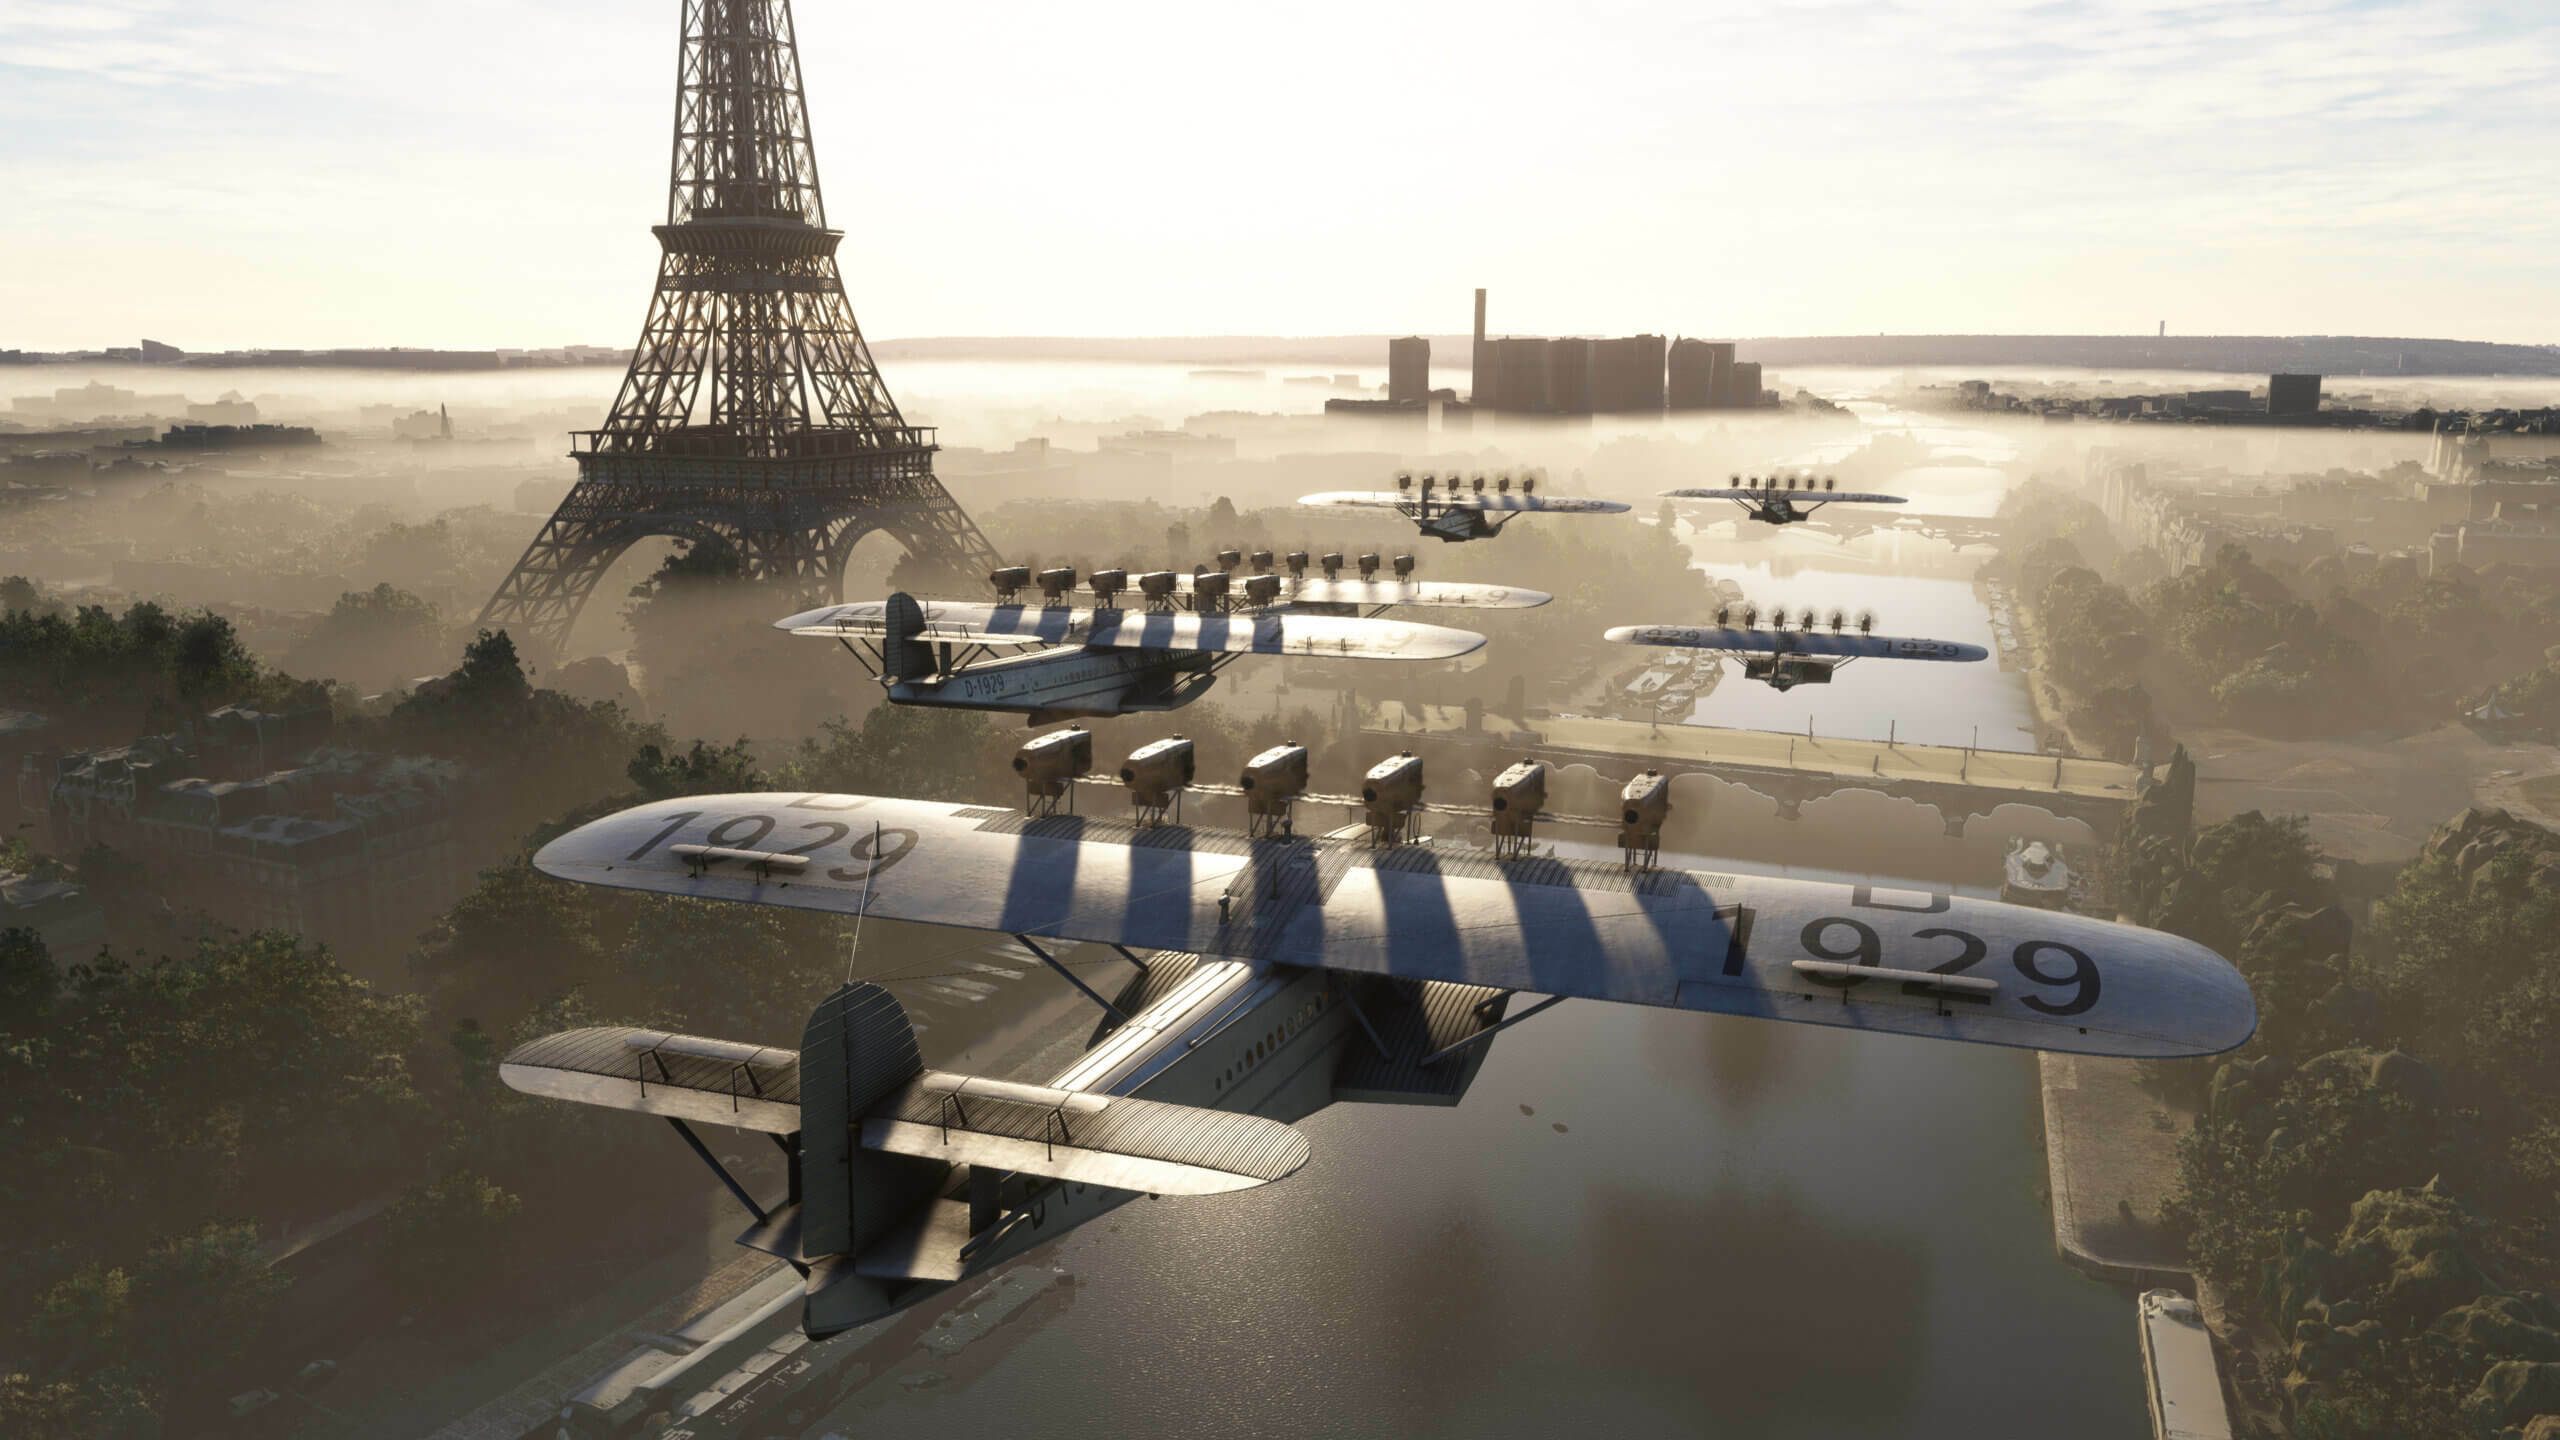 Fly a DC-3, or 'Spruce Goose' in the New Microsoft Flight